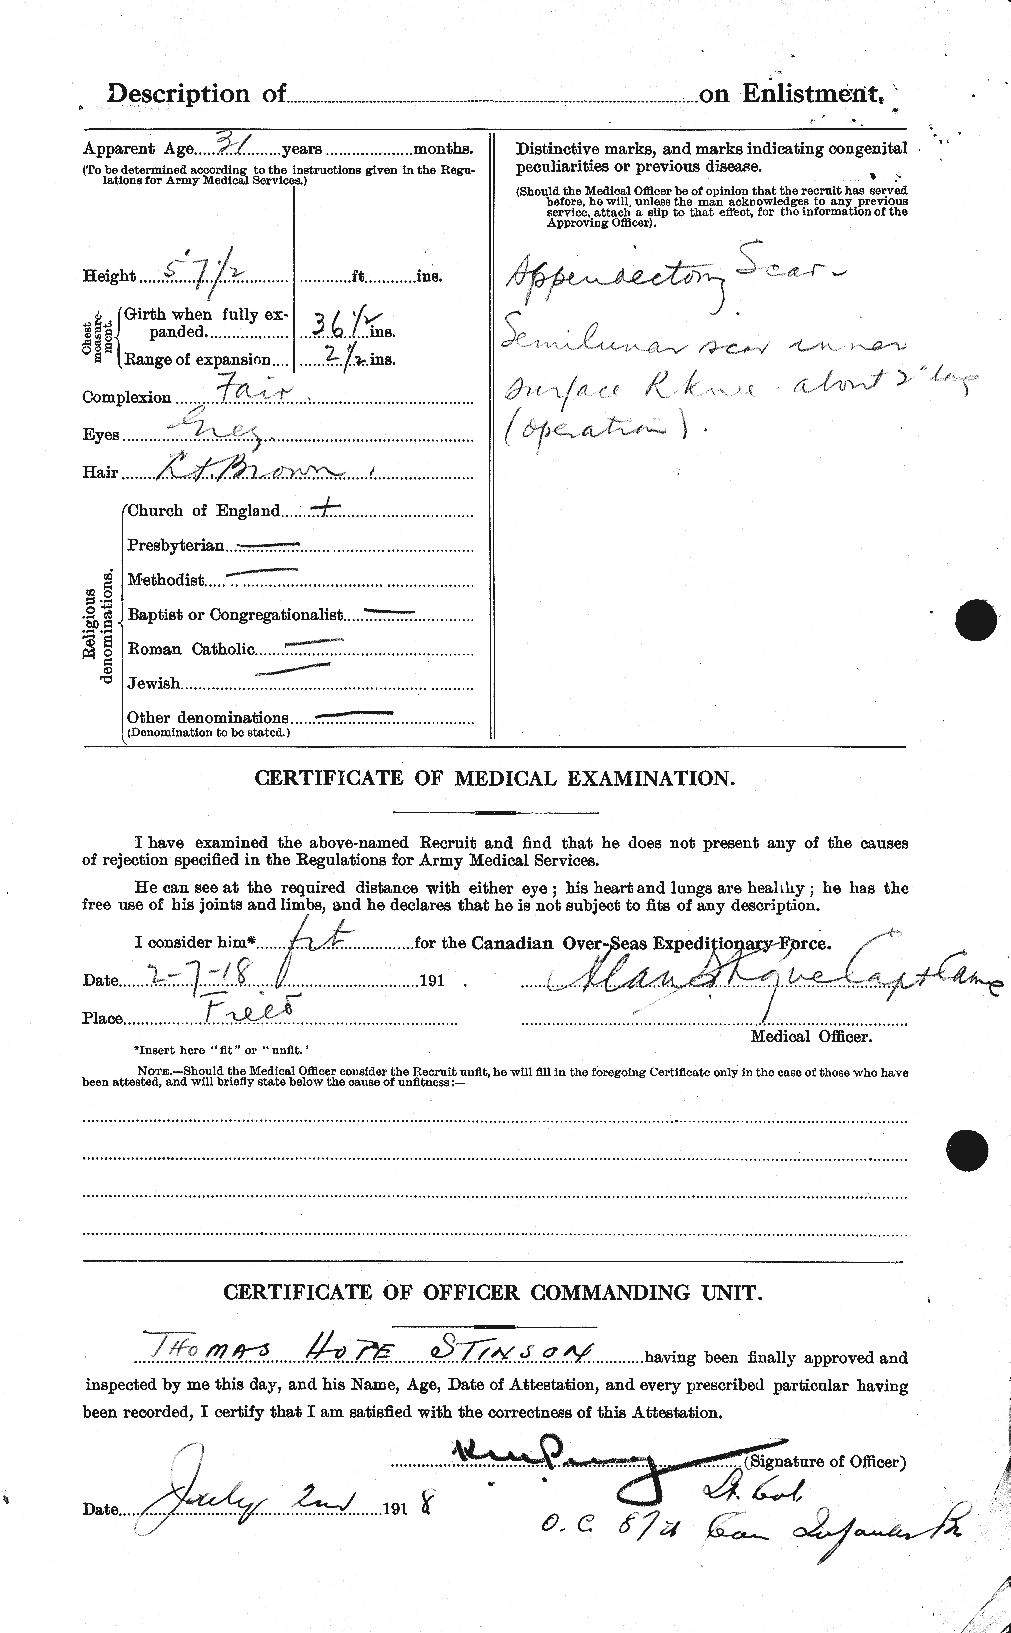 Personnel Records of the First World War - CEF 120123b